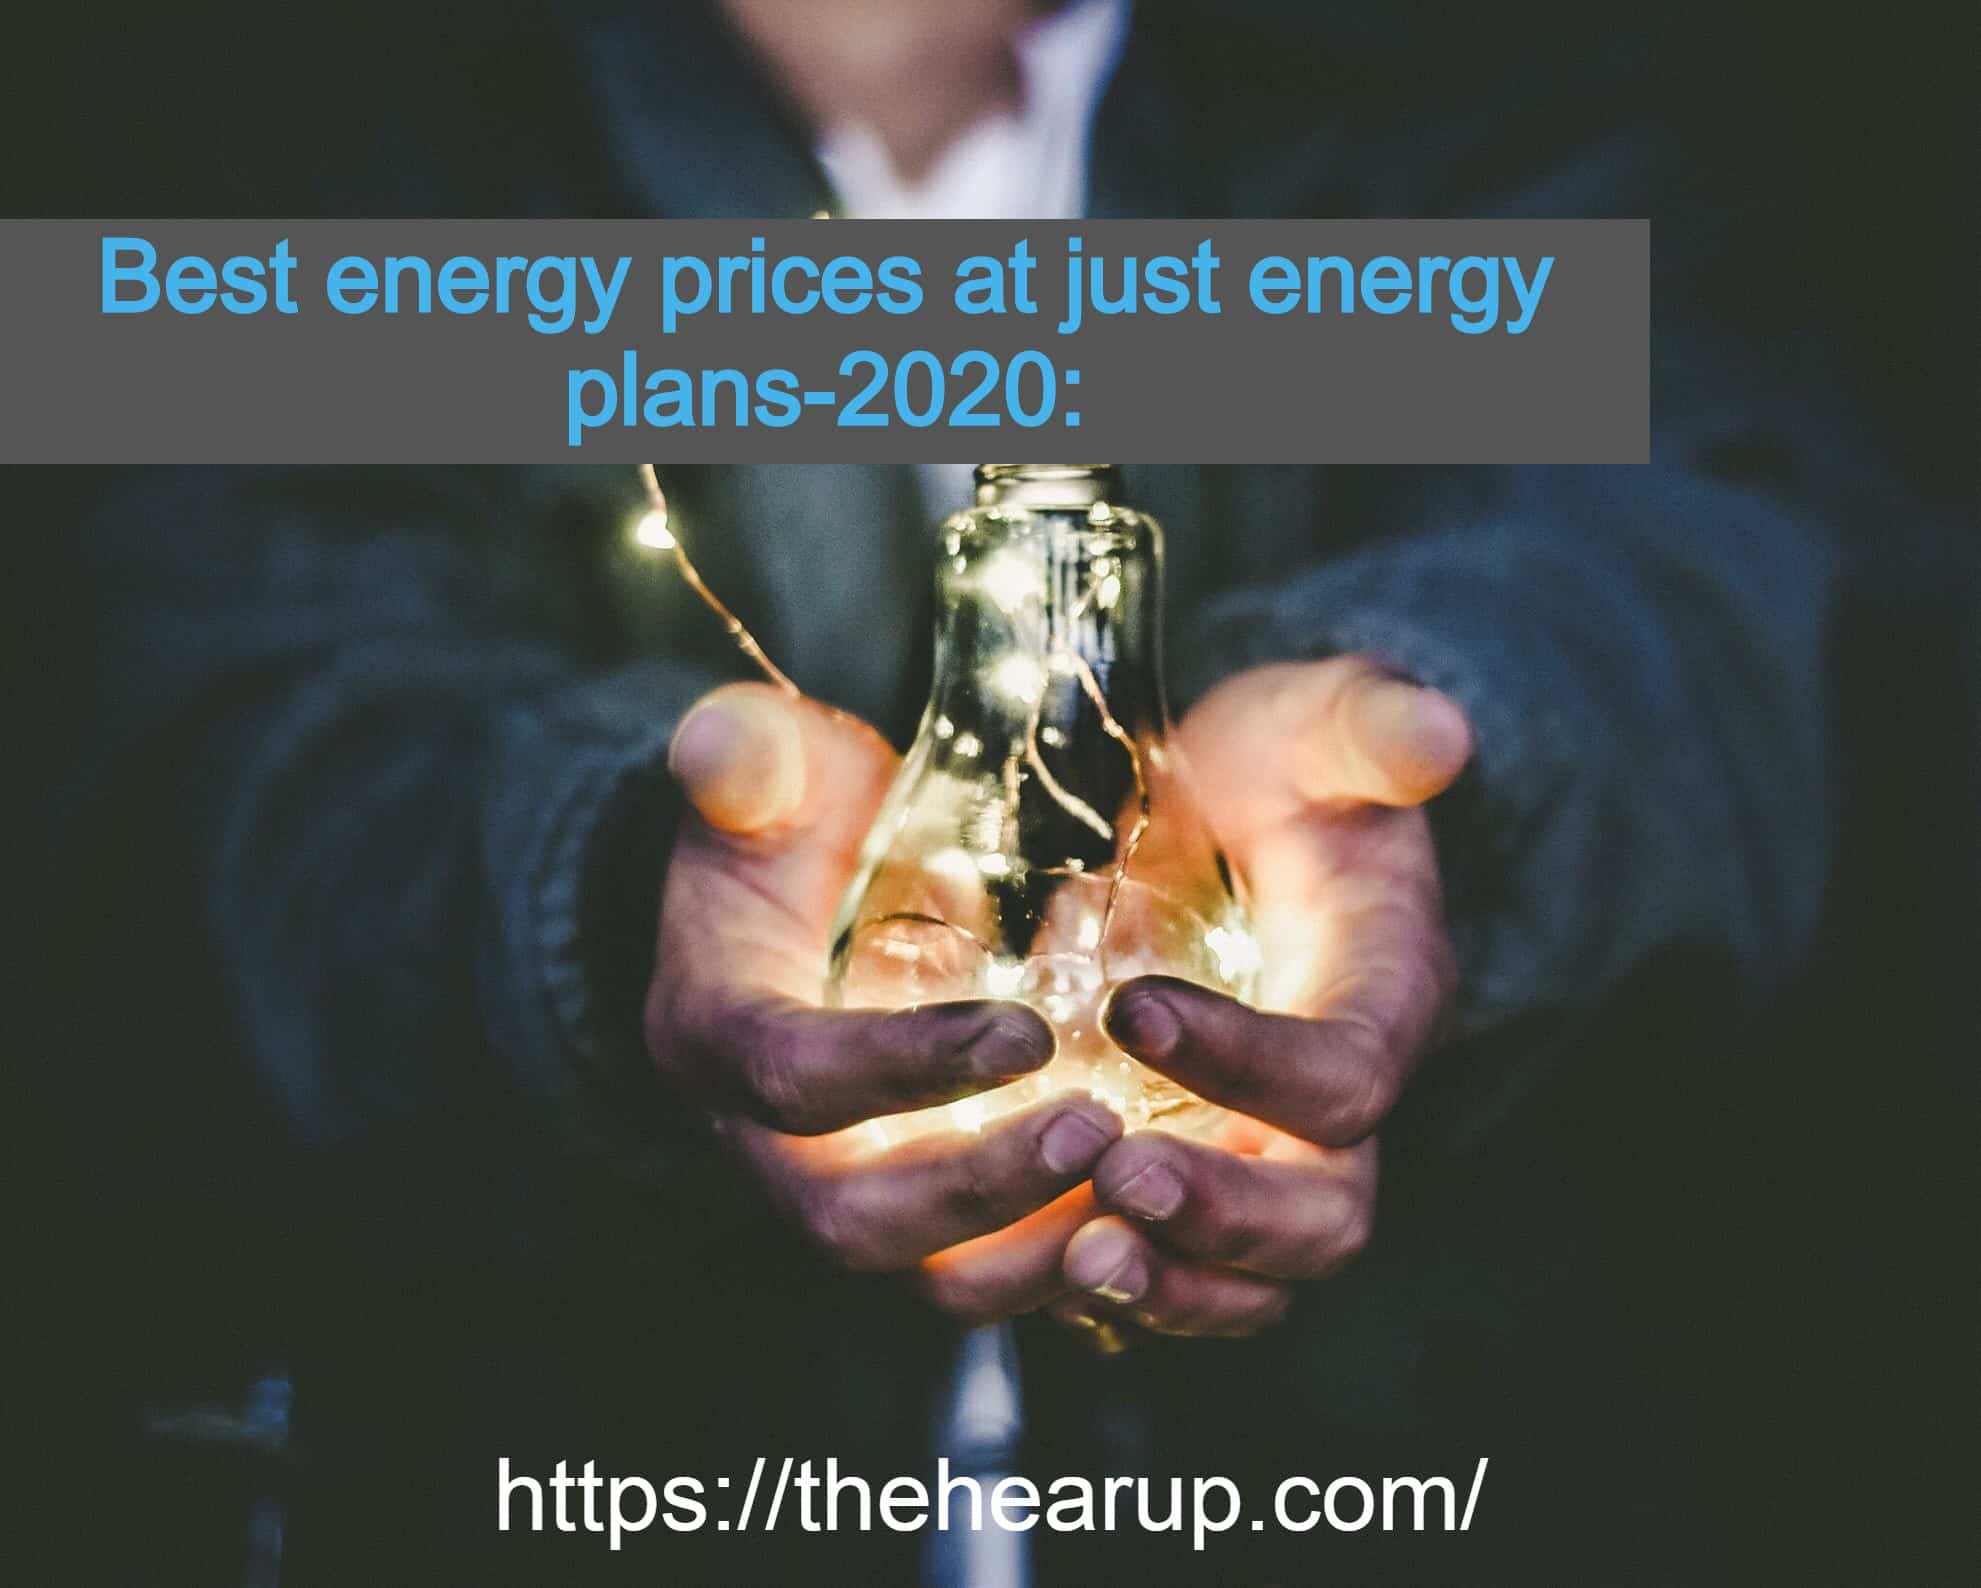 Best energy prices at just energy plans-2020: